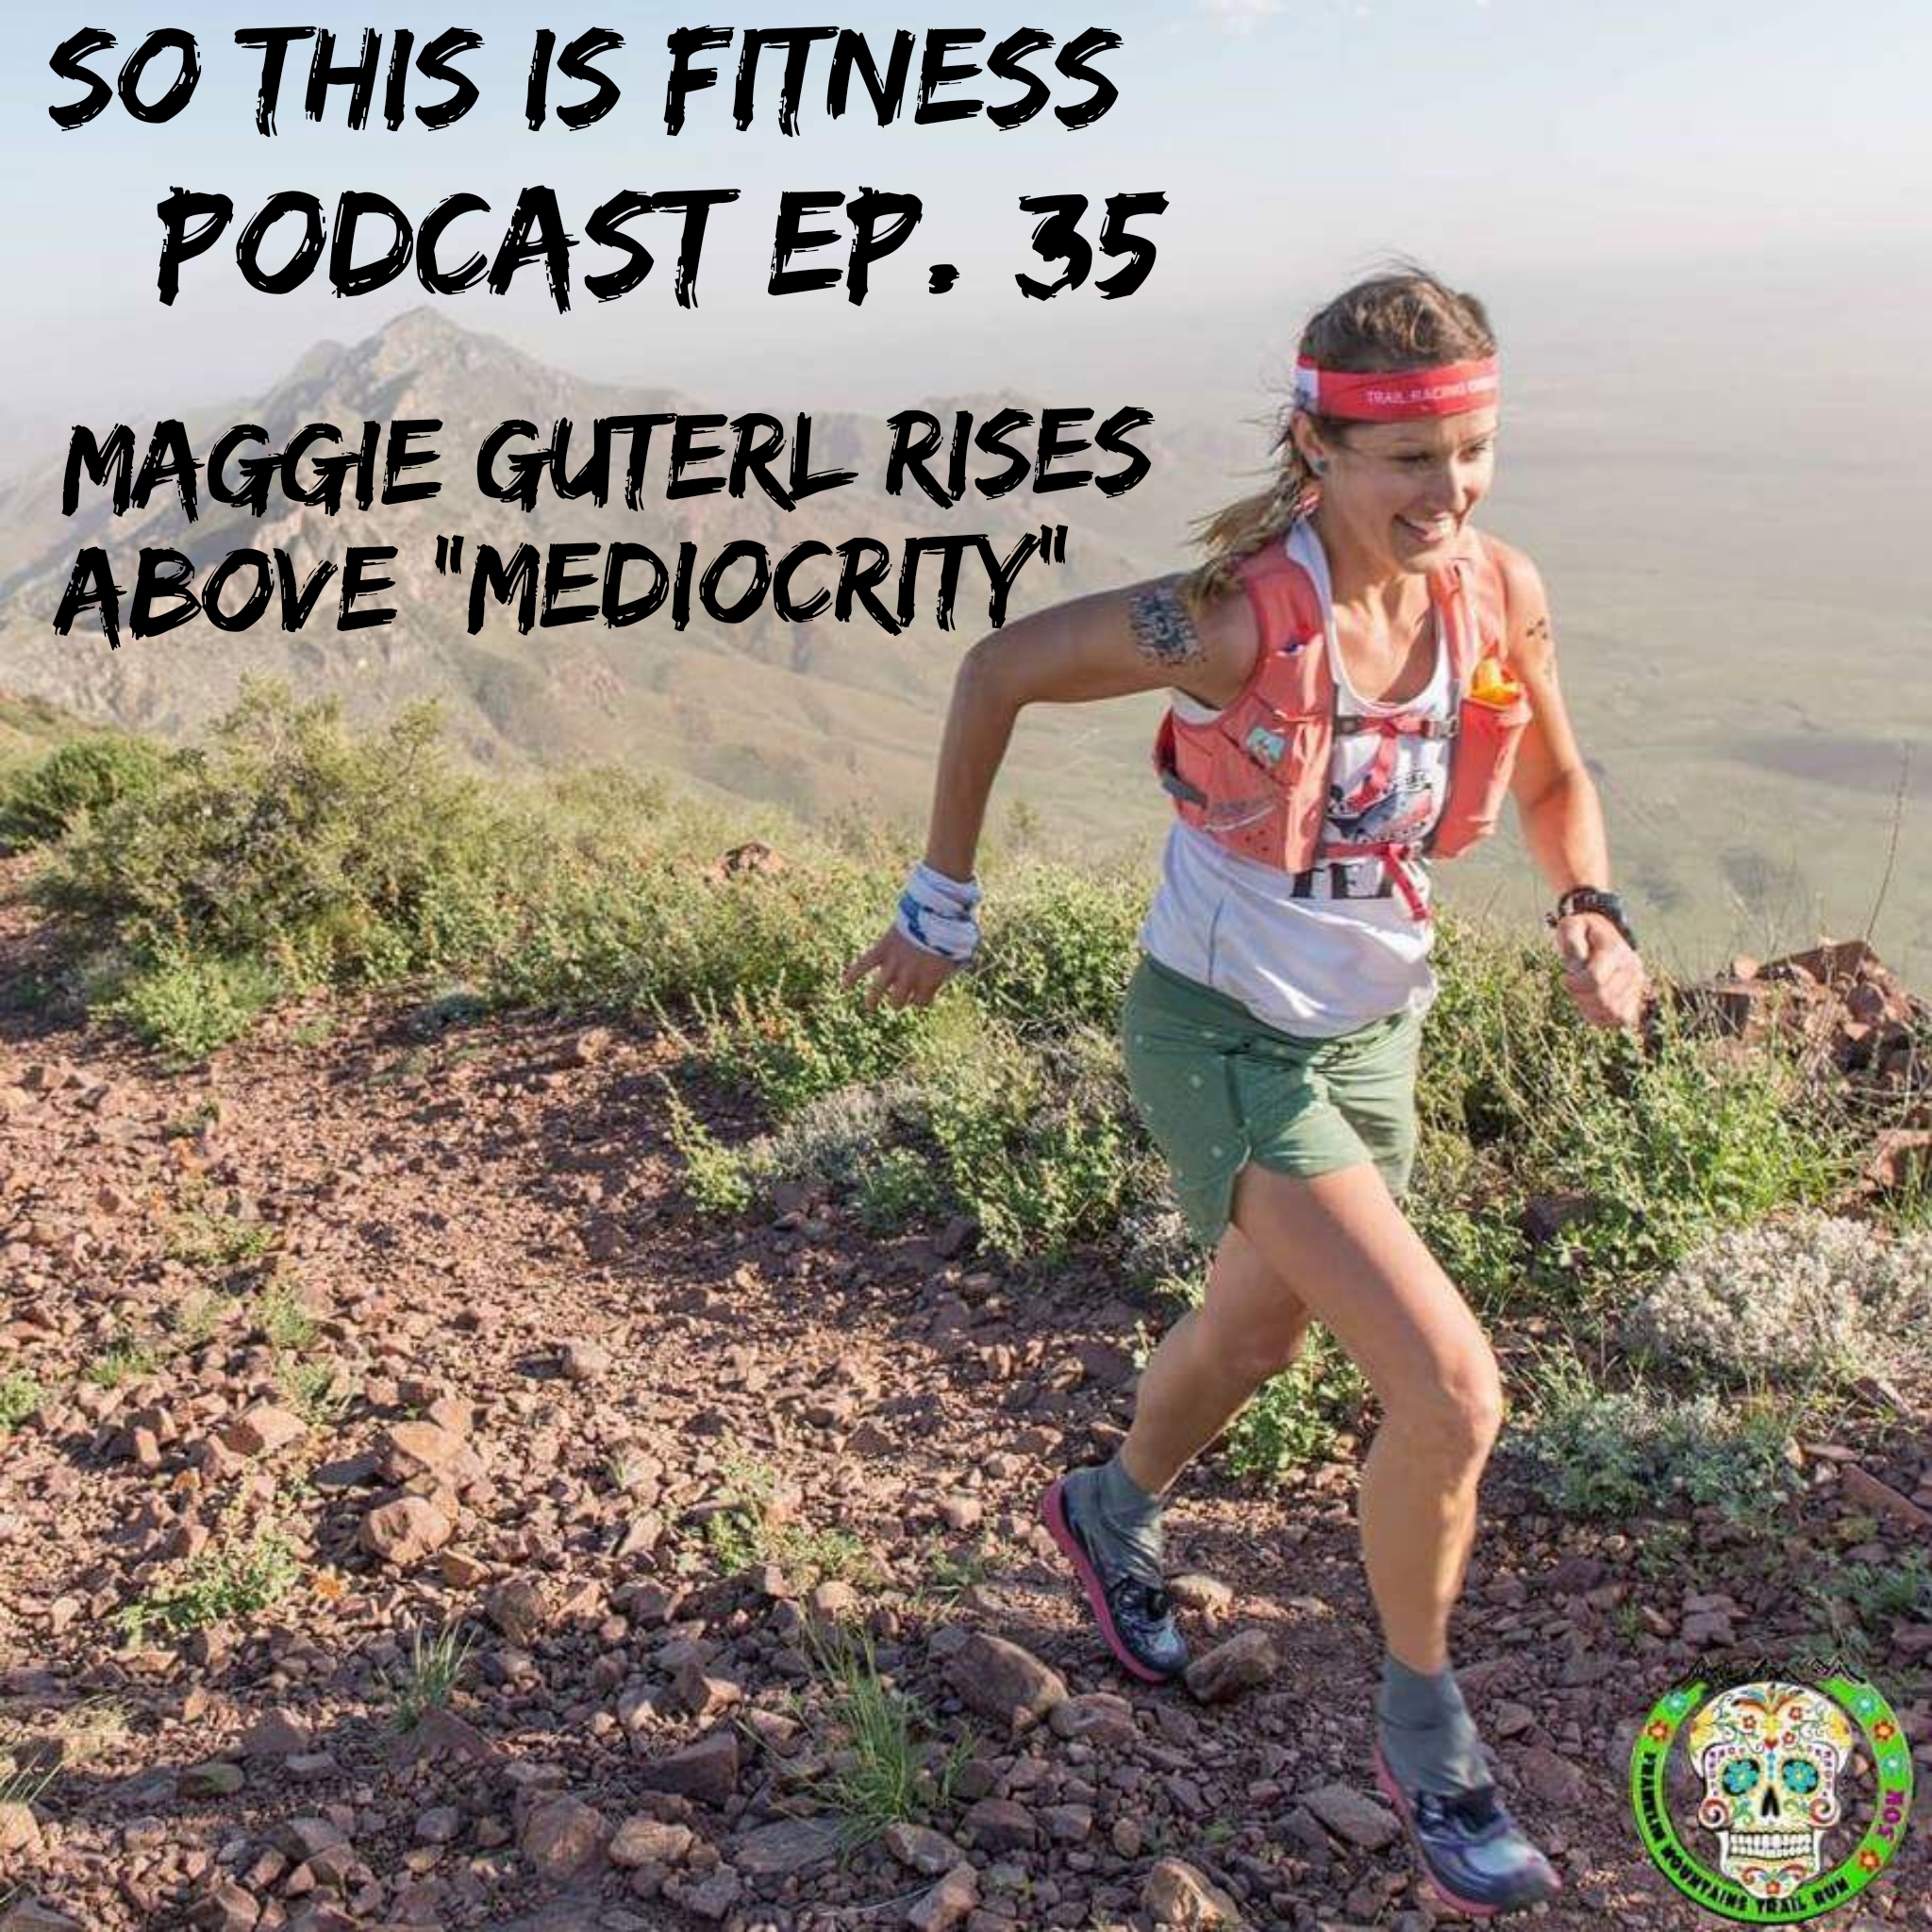 Maggie Guterl Rises Above “Mediocrity” (Podcast #35)